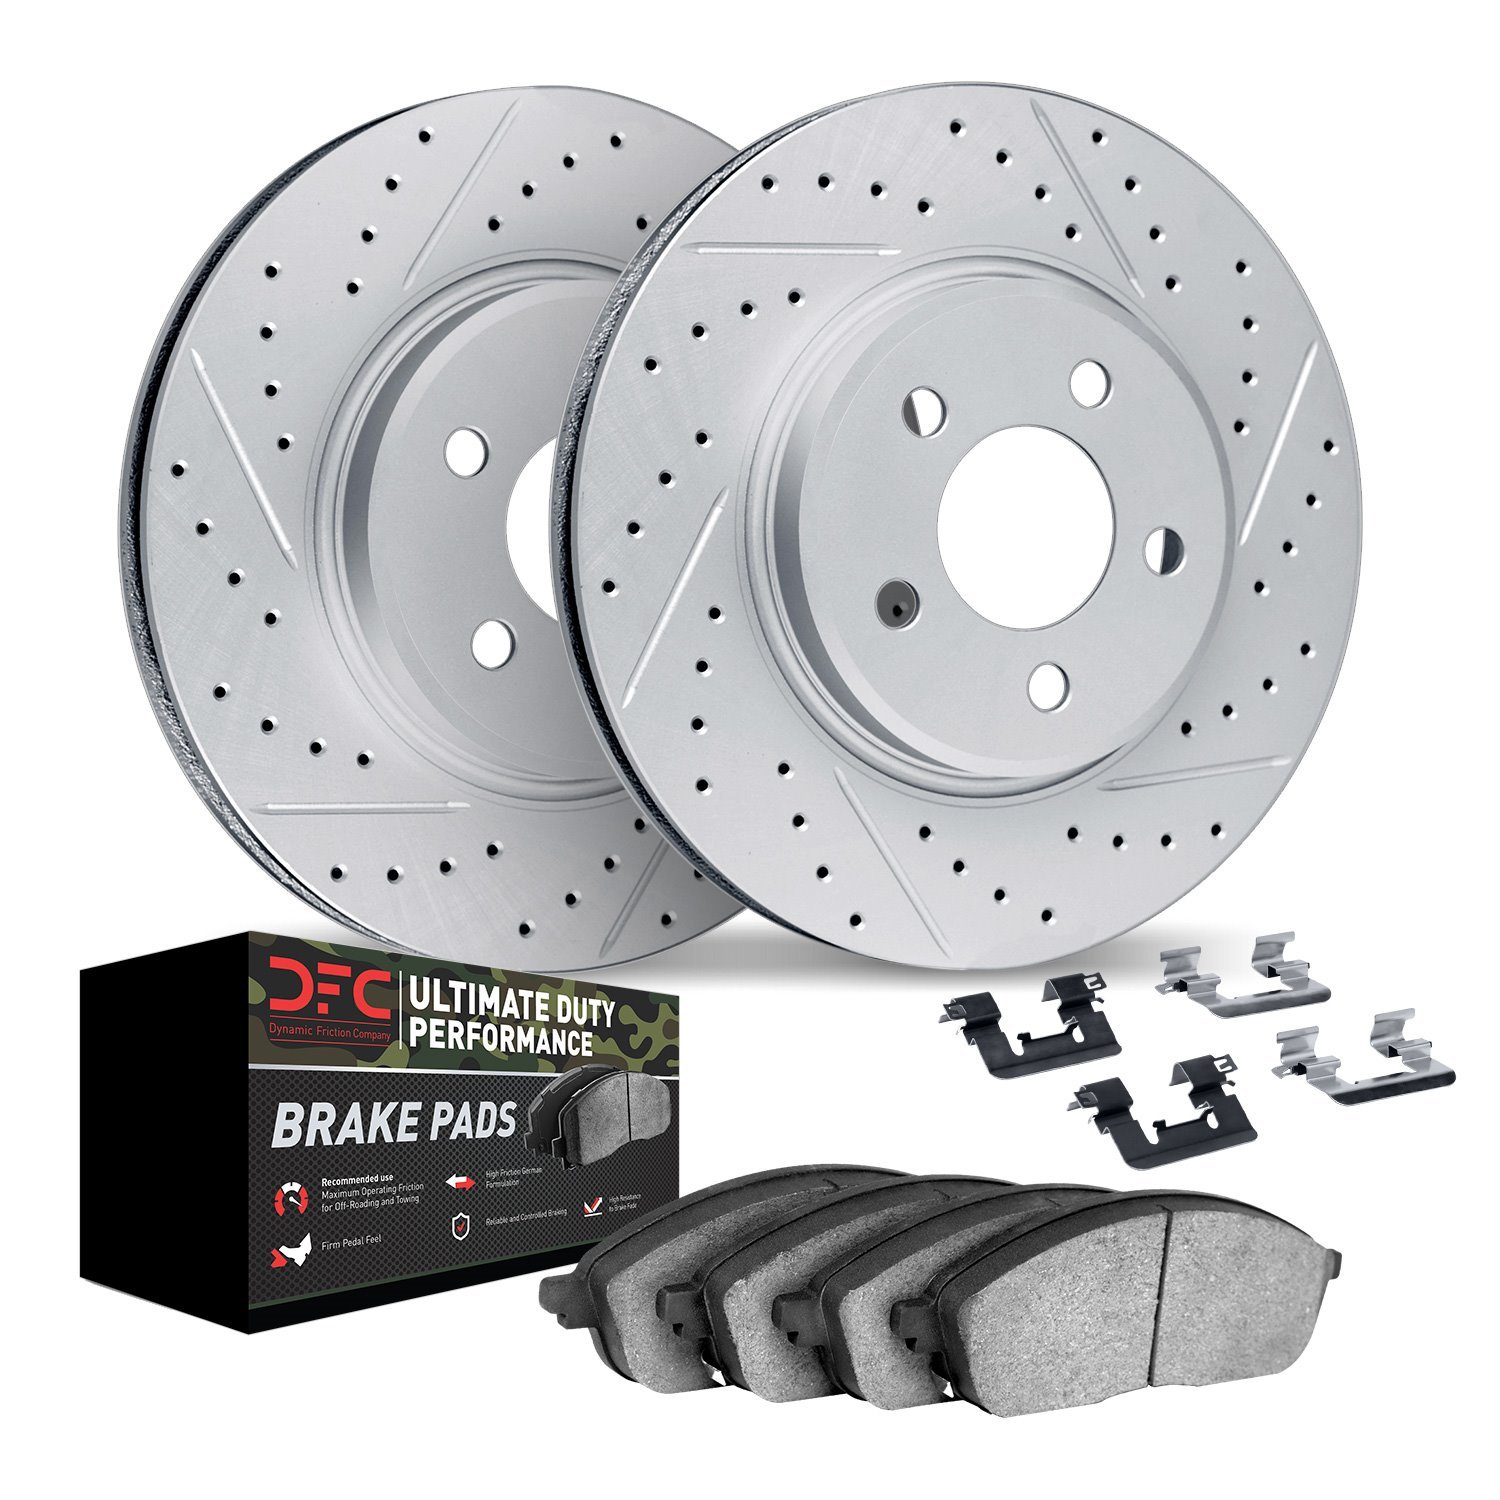 2412-40015 Geoperformance Drilled/Slotted Brake Rotors with Ultimate-Duty Brake Pads Kit & Hardware, 2005-2010 Multiple Makes/Mo